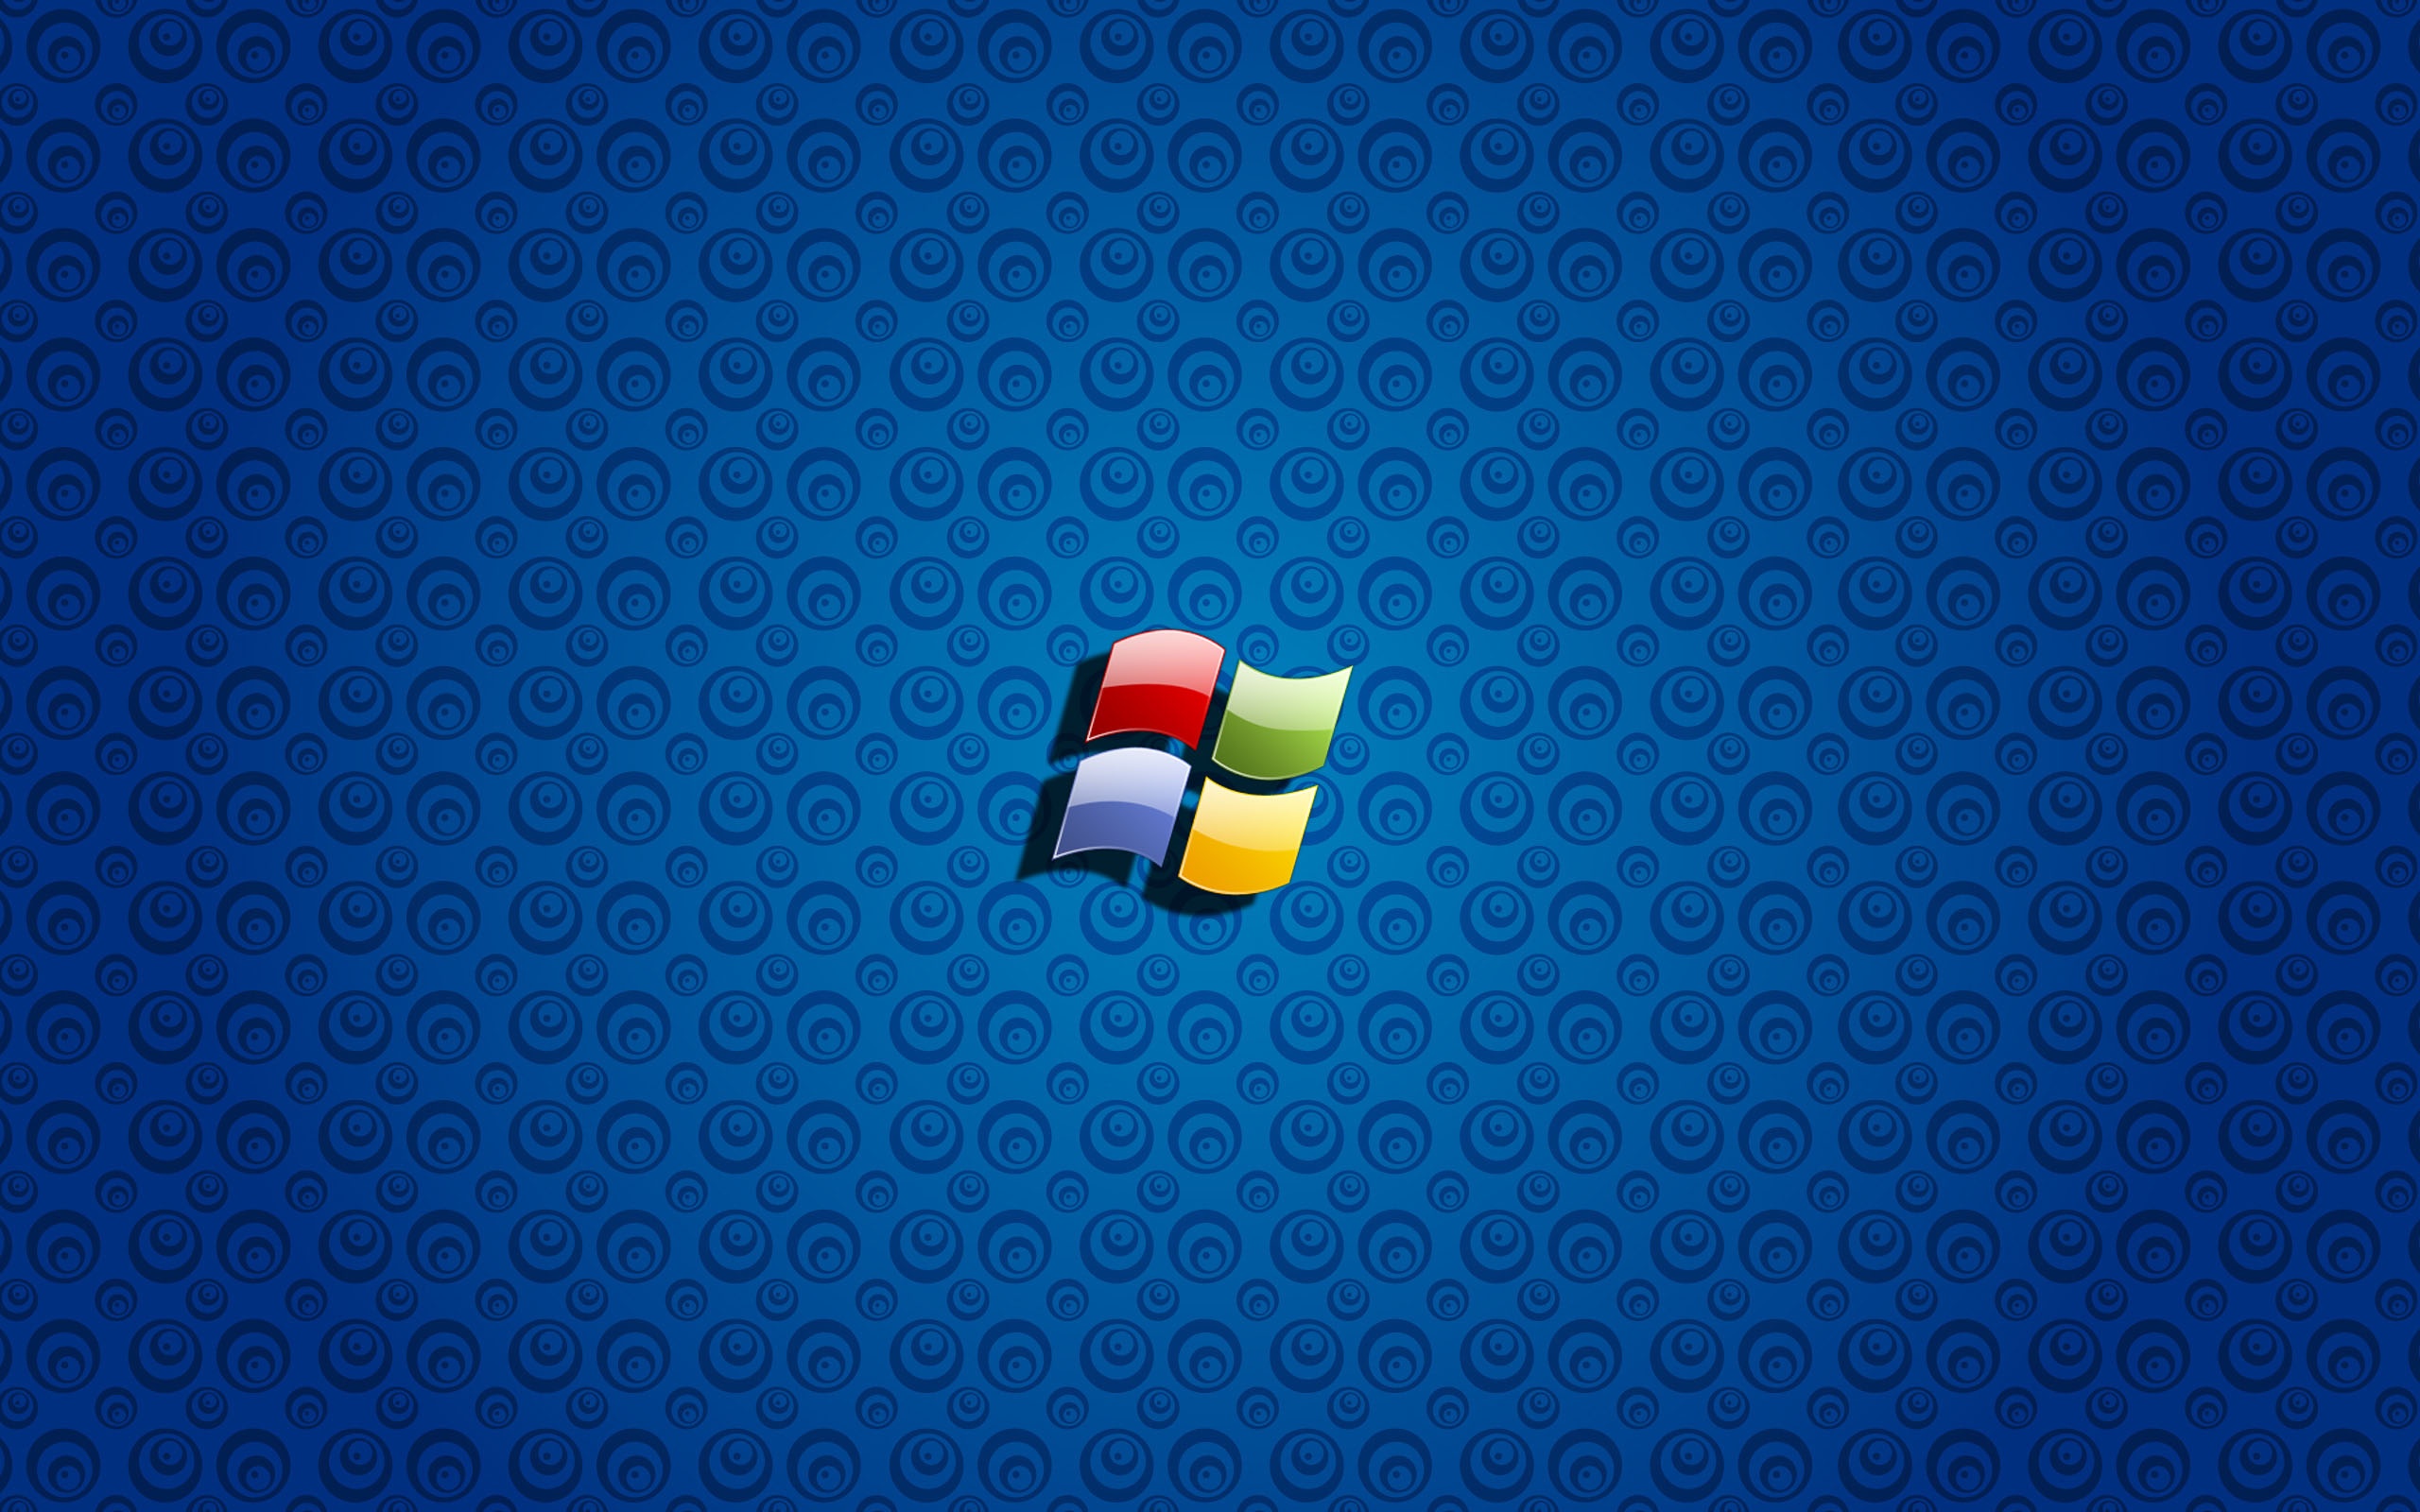 Windows Blue Wallpaper And Image Pictures